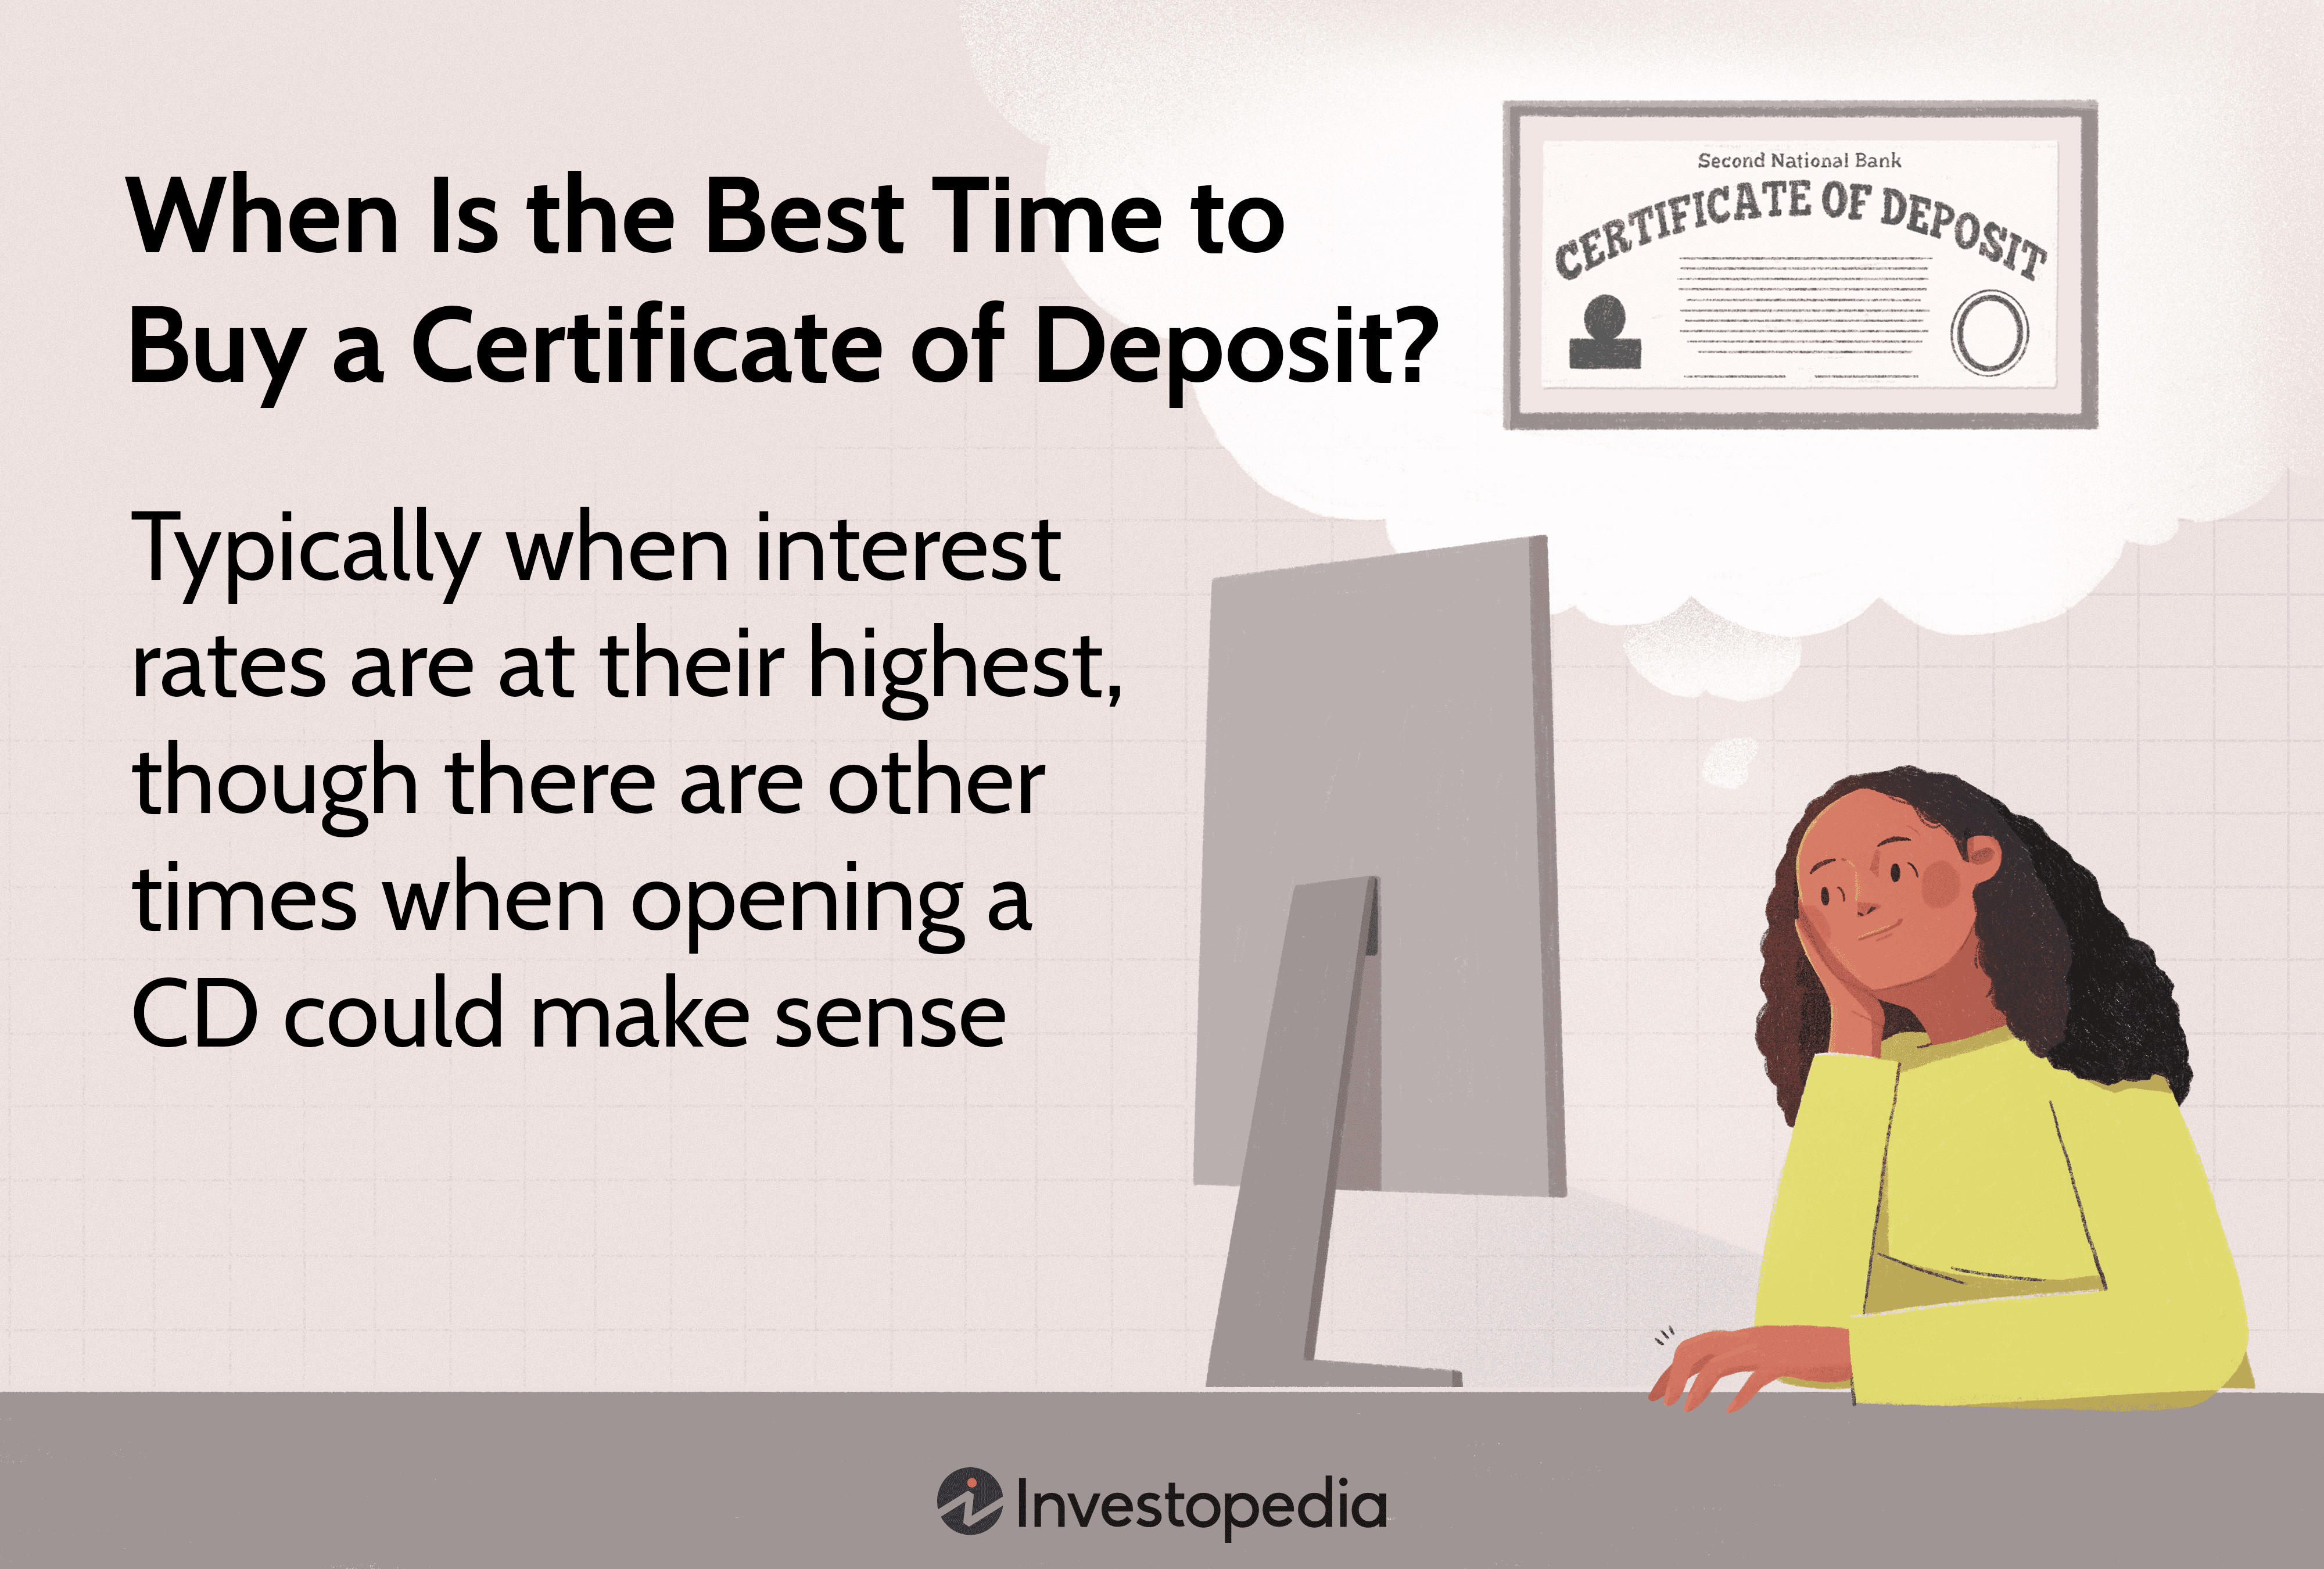 When Is the Best Time to Buy a Certificate of Deposit